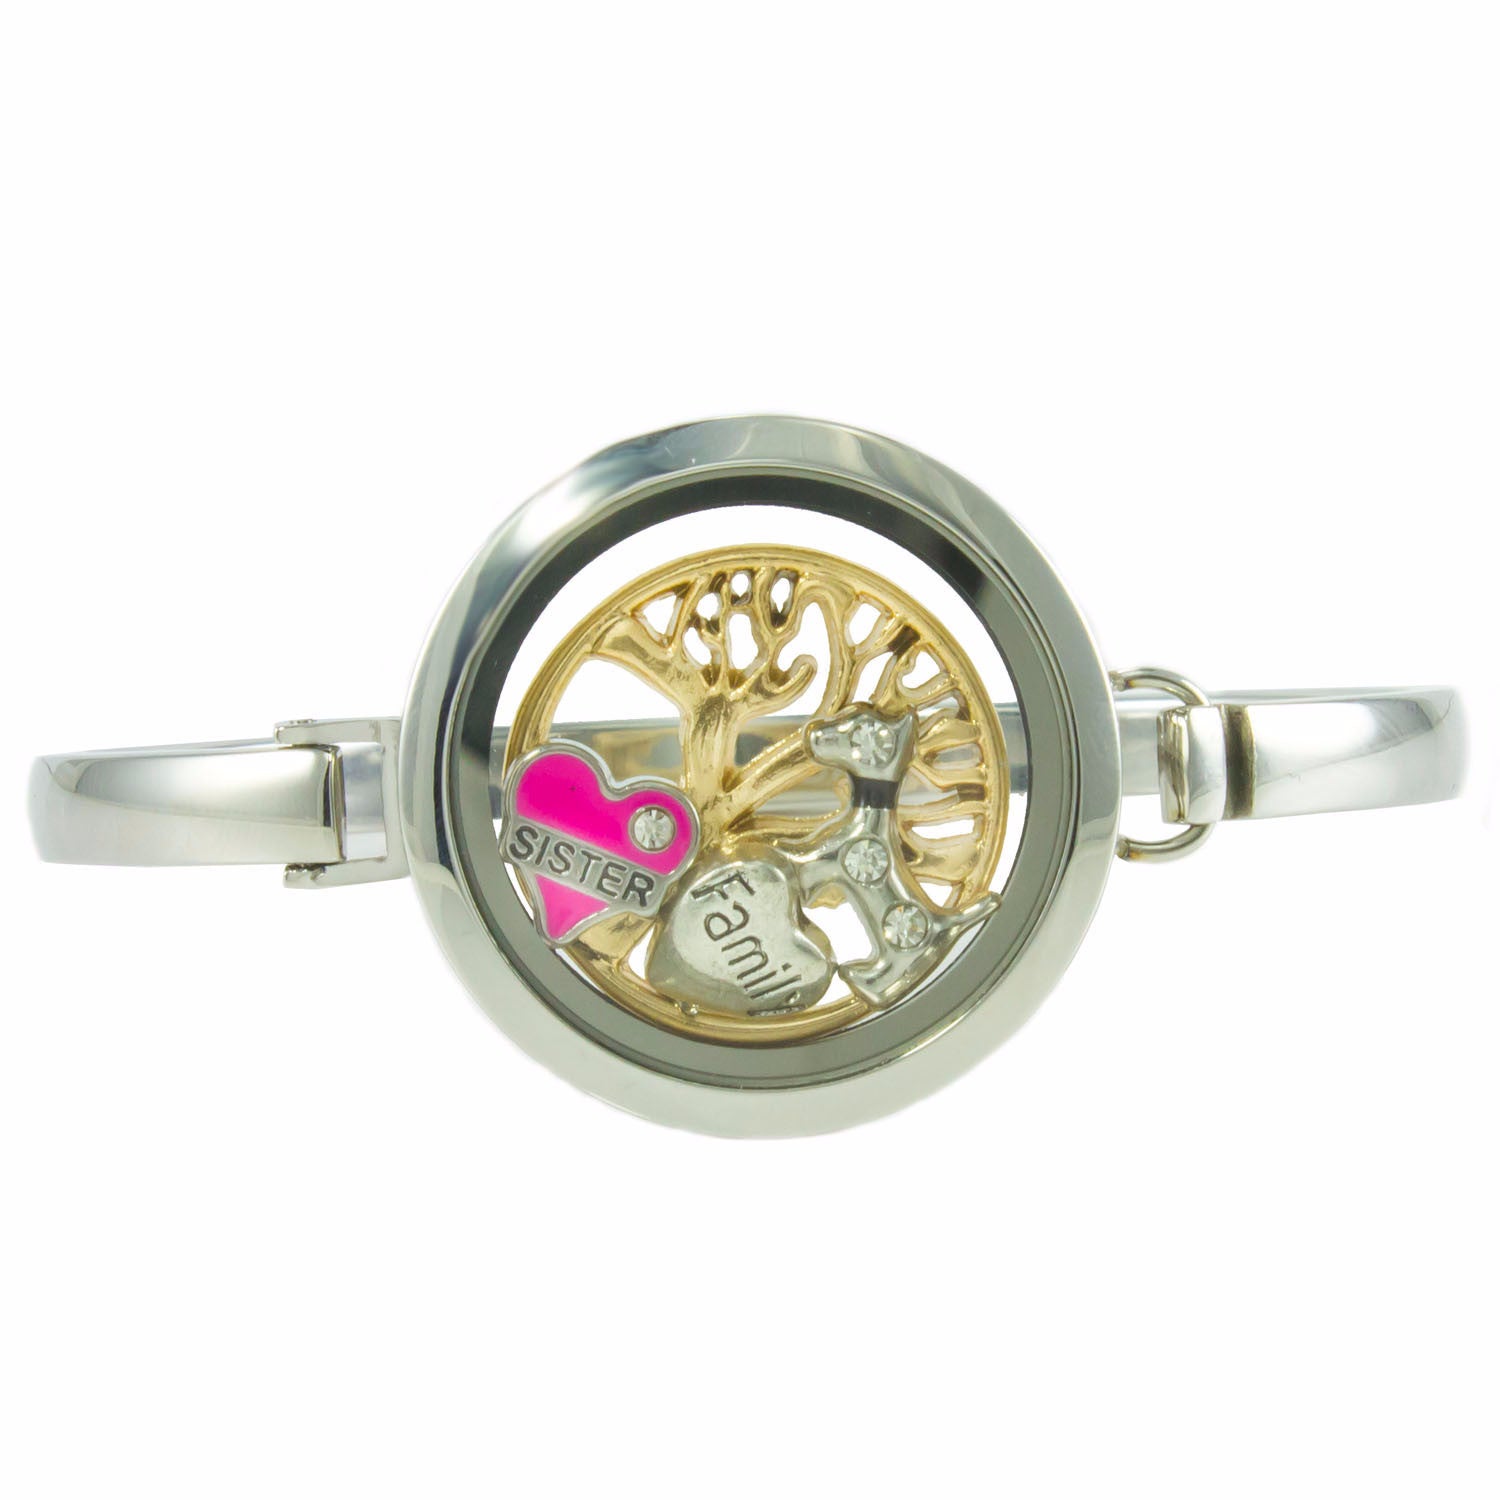 Floating Locket Bangle Bracelet with Choice of 6 Charms and 1